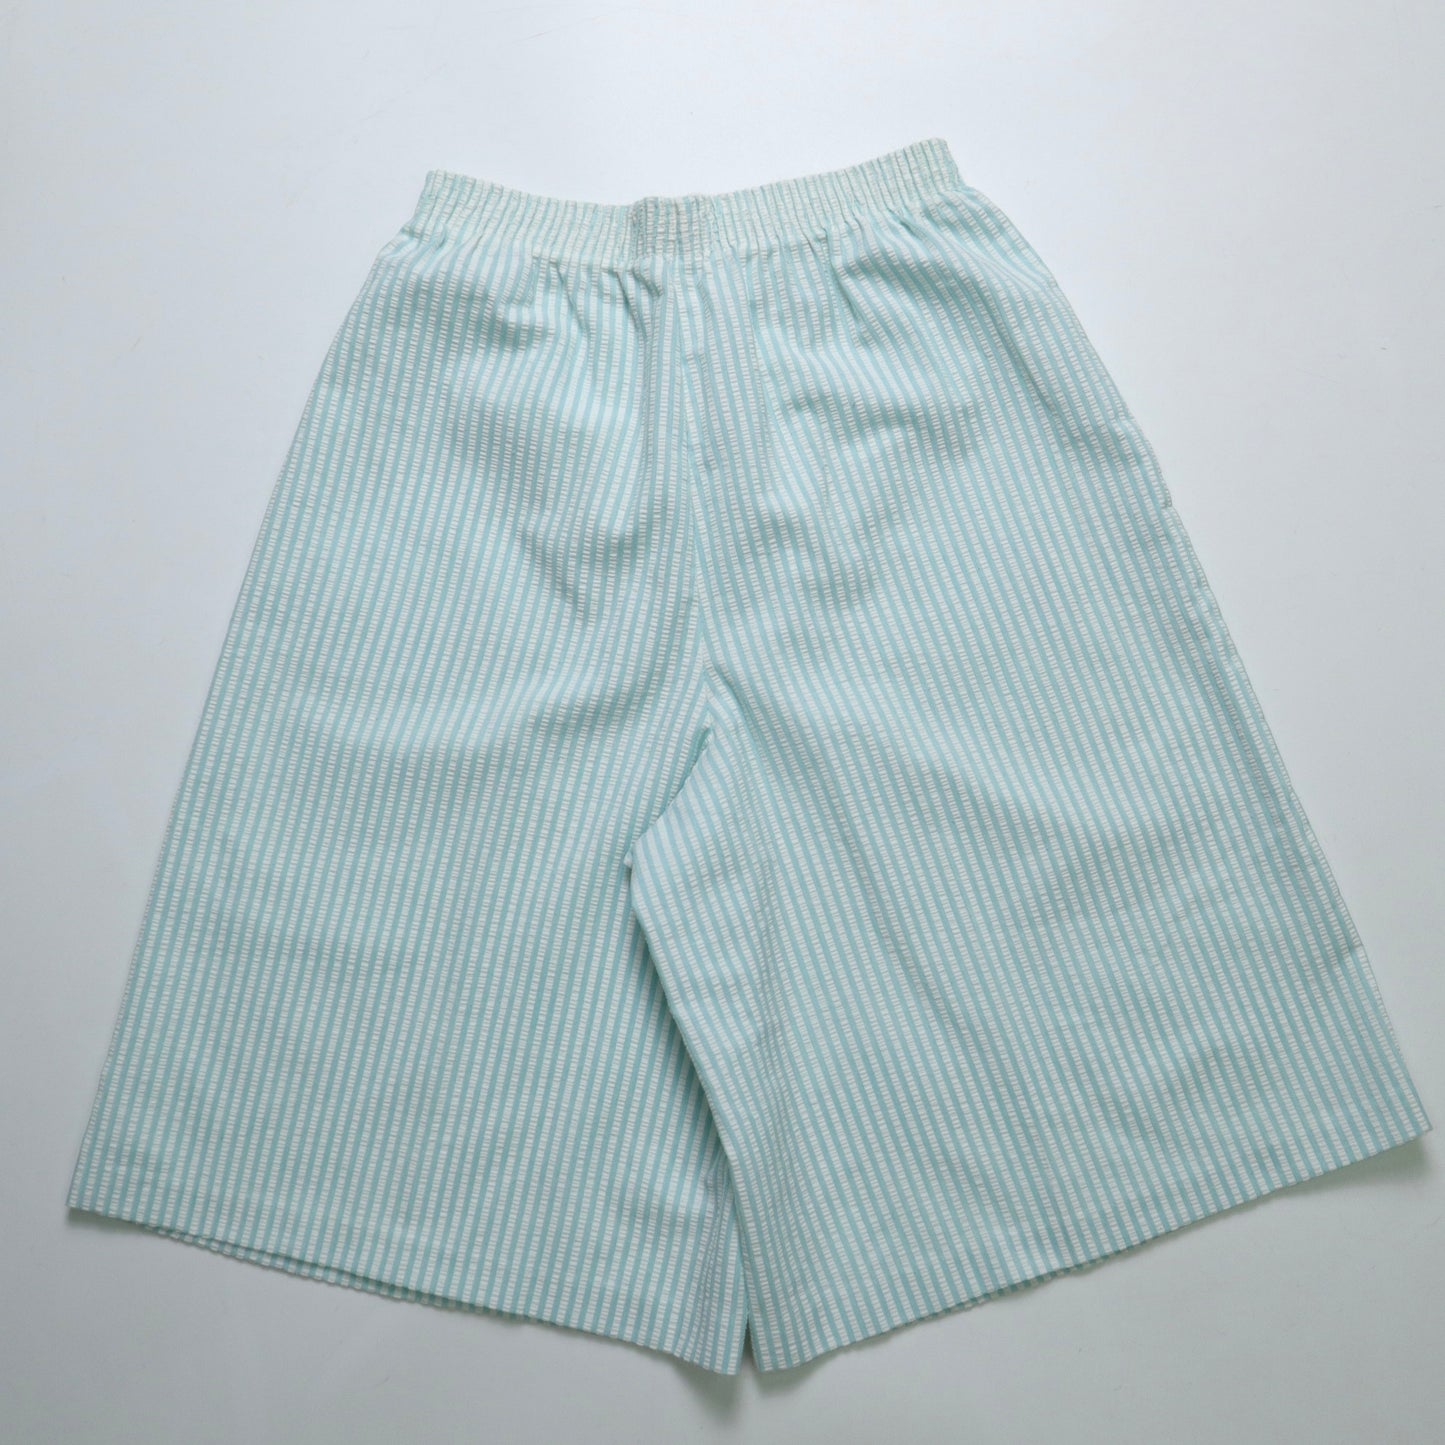 1980s American-made blue and white three-dimensional striped shorts